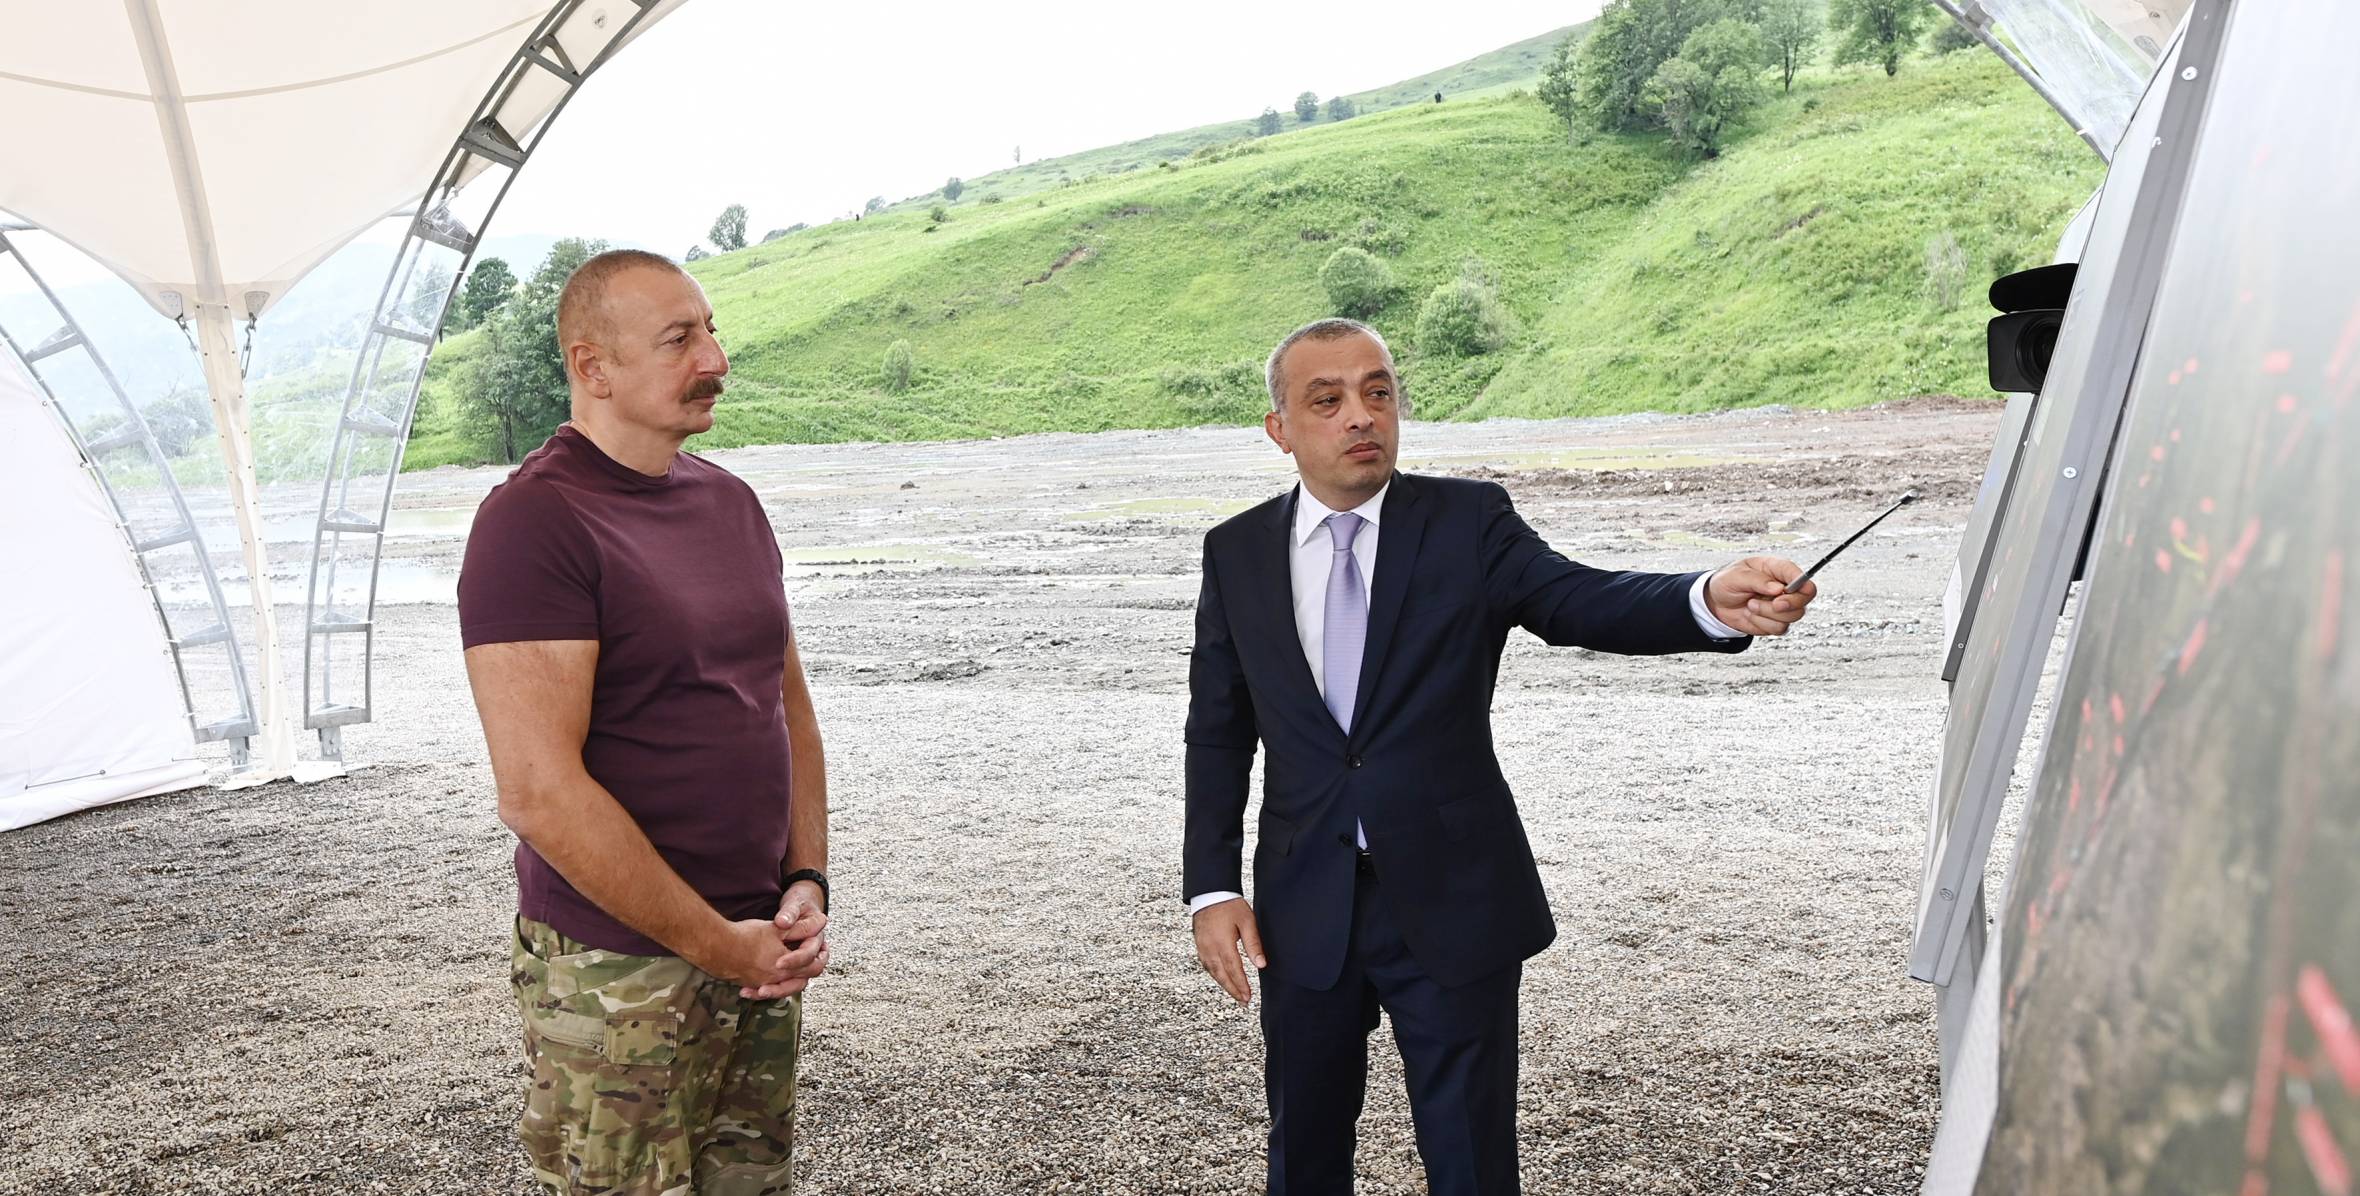 Ilham Aliyev familiarized himself with “Hakarichay” reservoir project in Lachin district